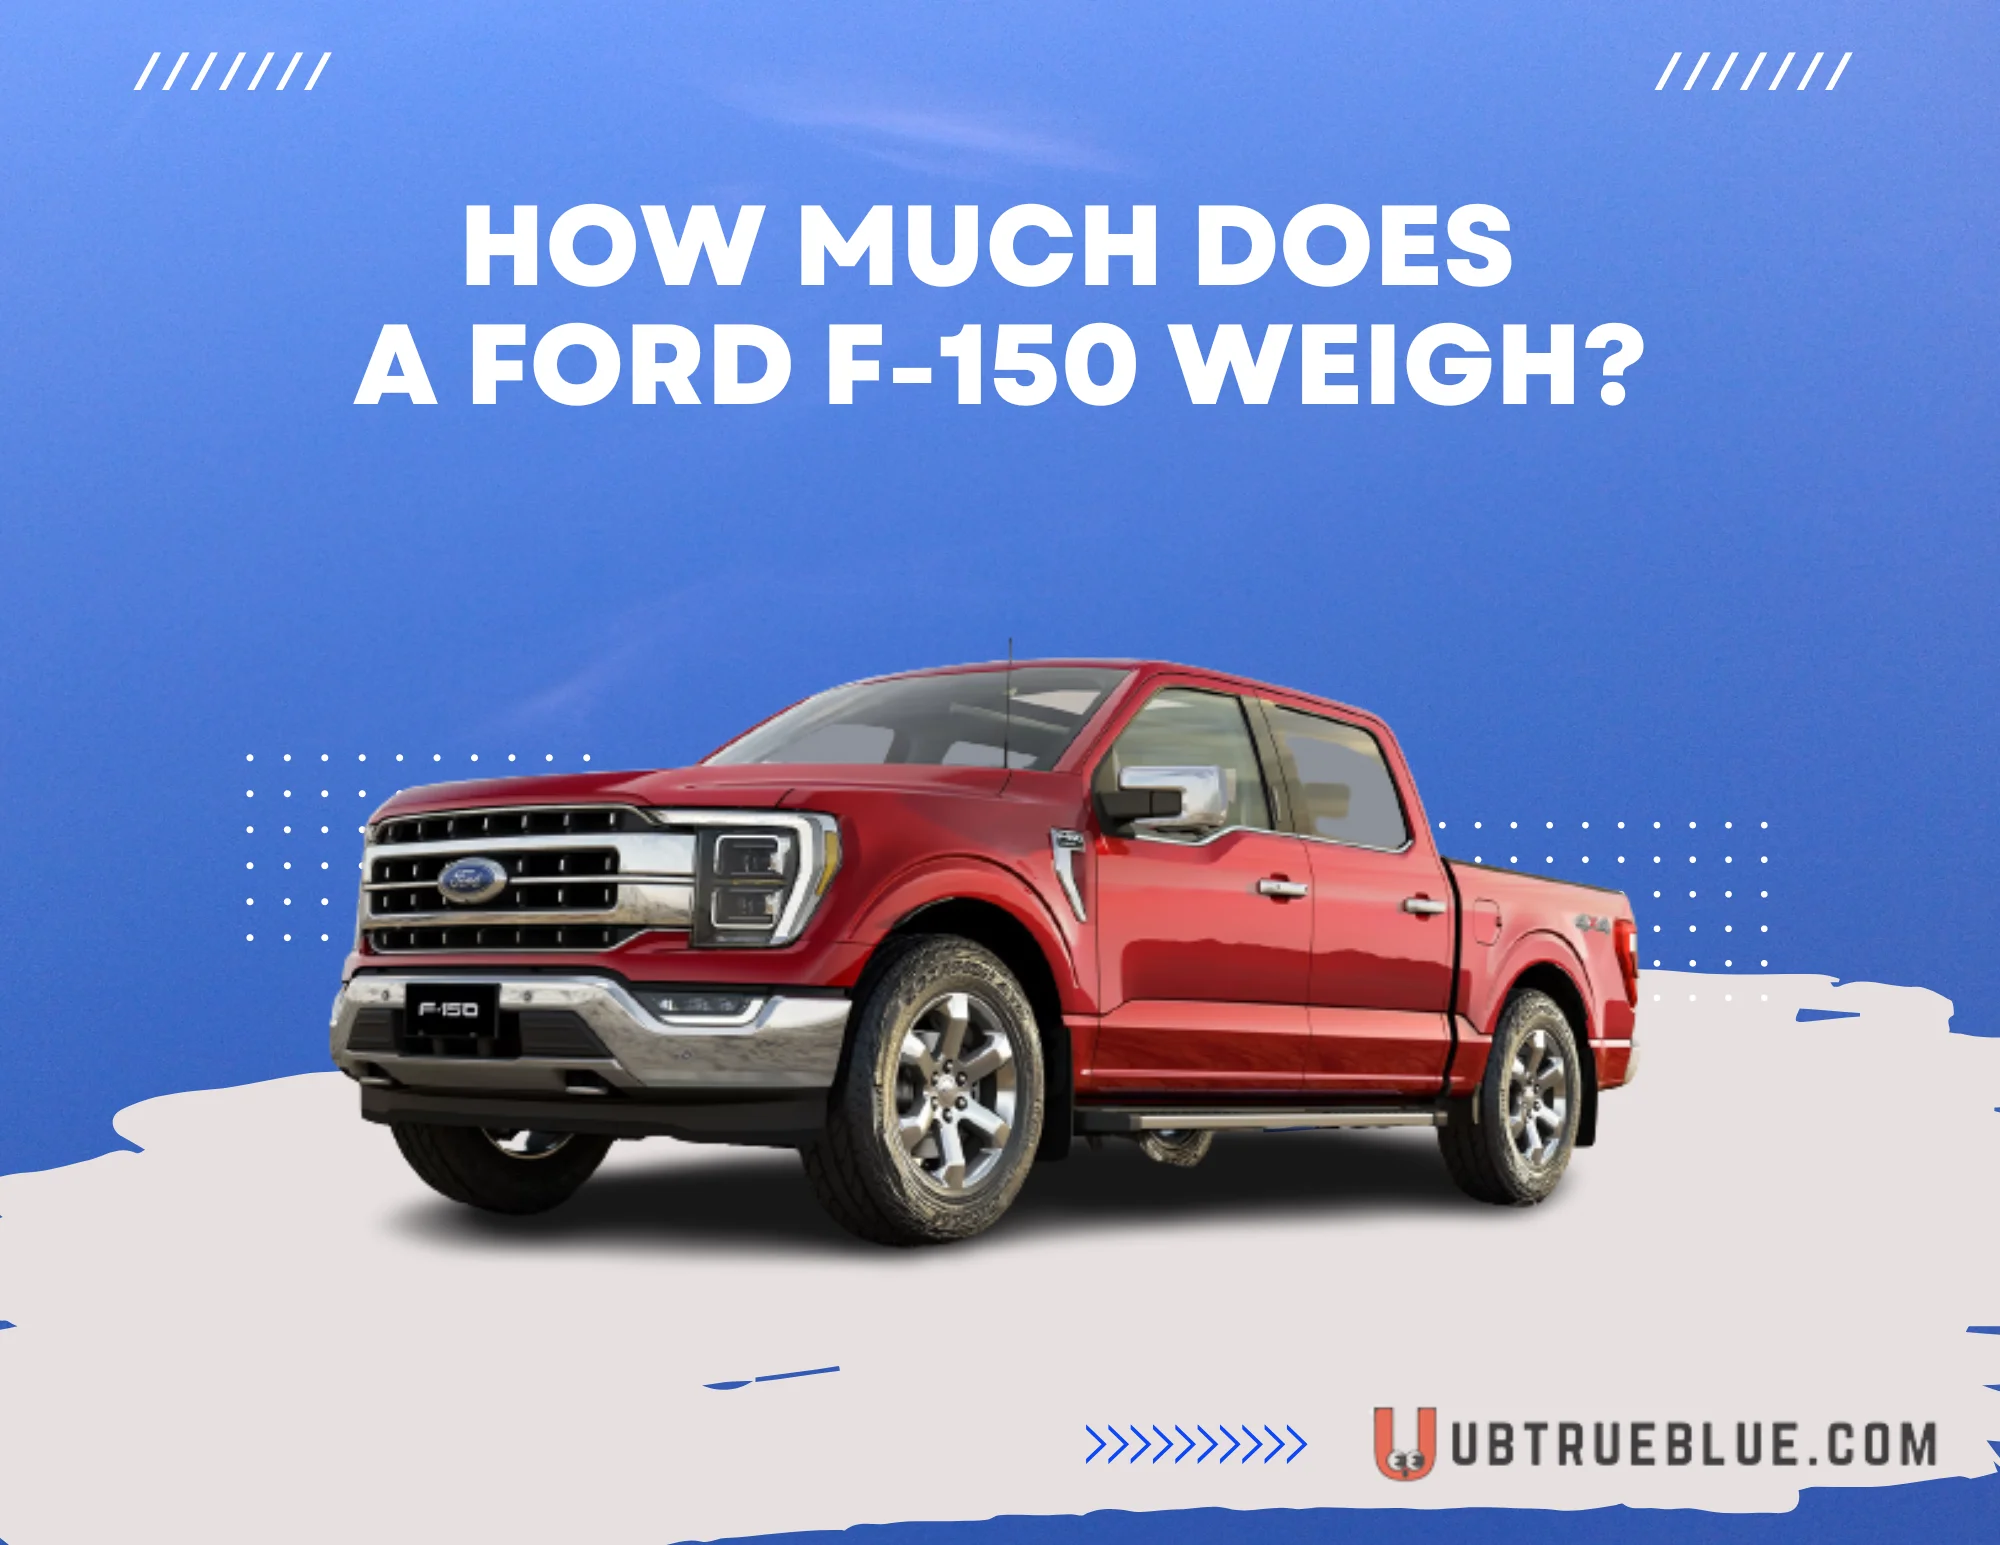 How Much Does A Ford F 150 Weigh On Ubtrueblue Automotive Weigh? Facts, Figures, And More 2023 F-150 Crew Cab F150 Lightning Weight F-250 Curb  Full